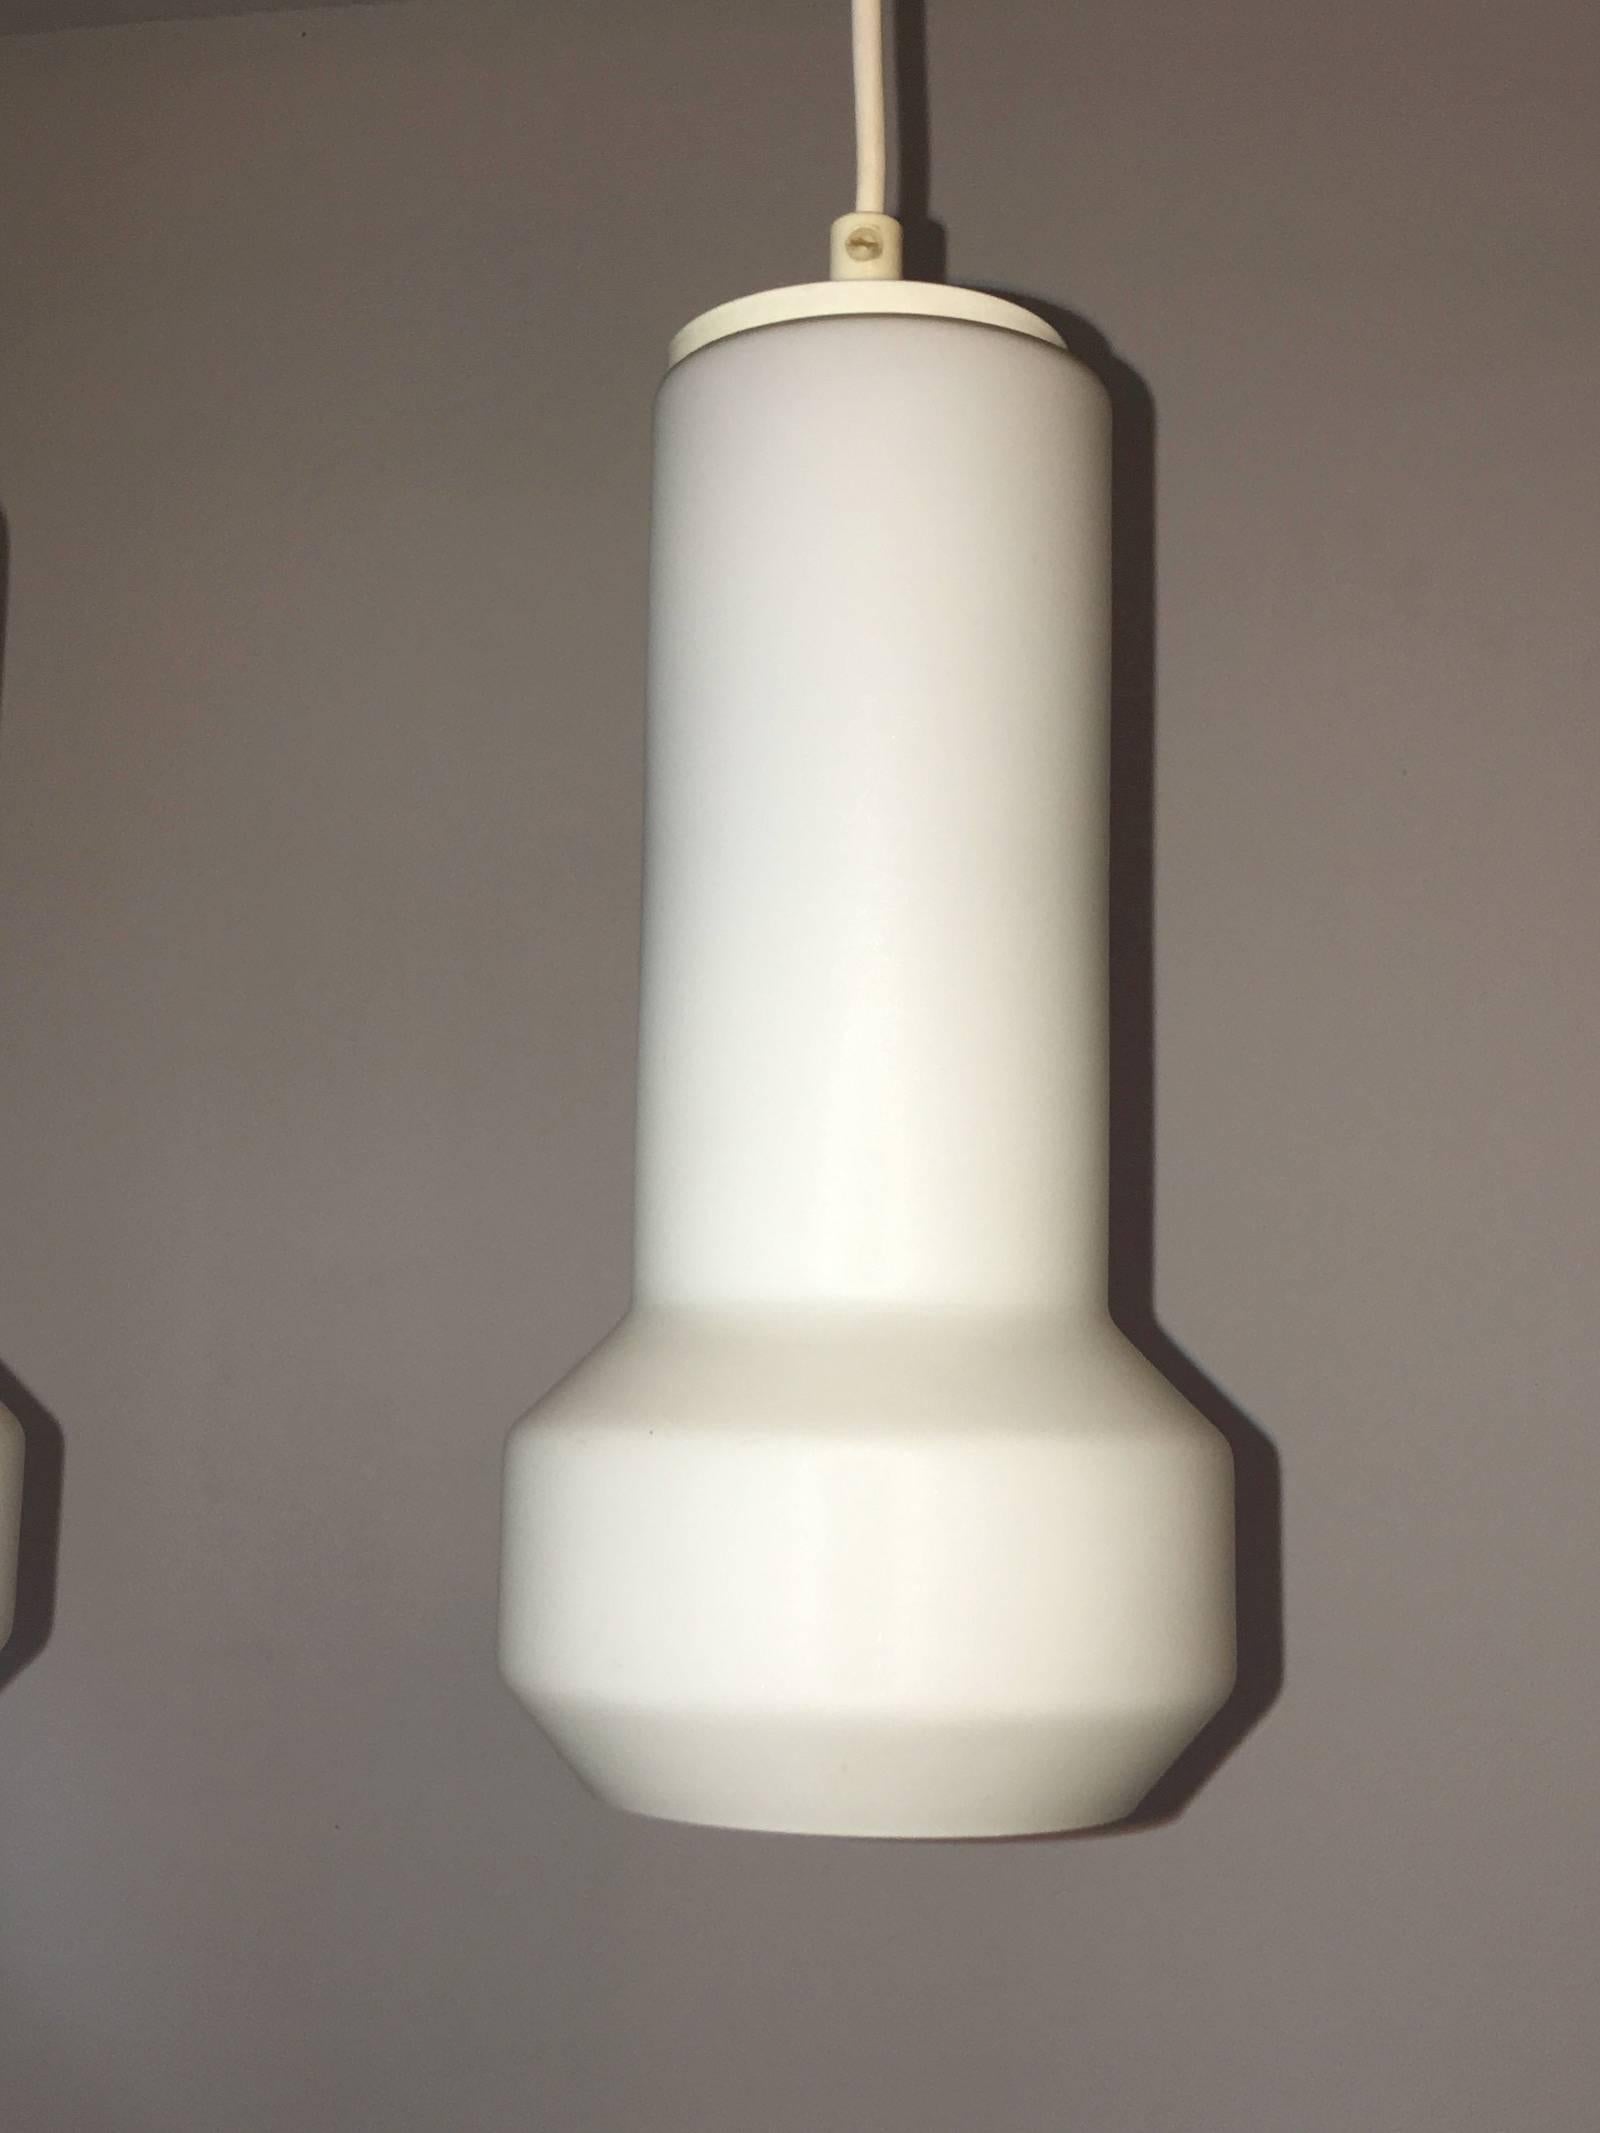 A pair of milk glass lamp pendants by Doria Leuchten, 1960s, Germany. The previous owners had used it as bedside Lamps. Each fixture requires one European E27 Edison bulb, up to 40 watts.